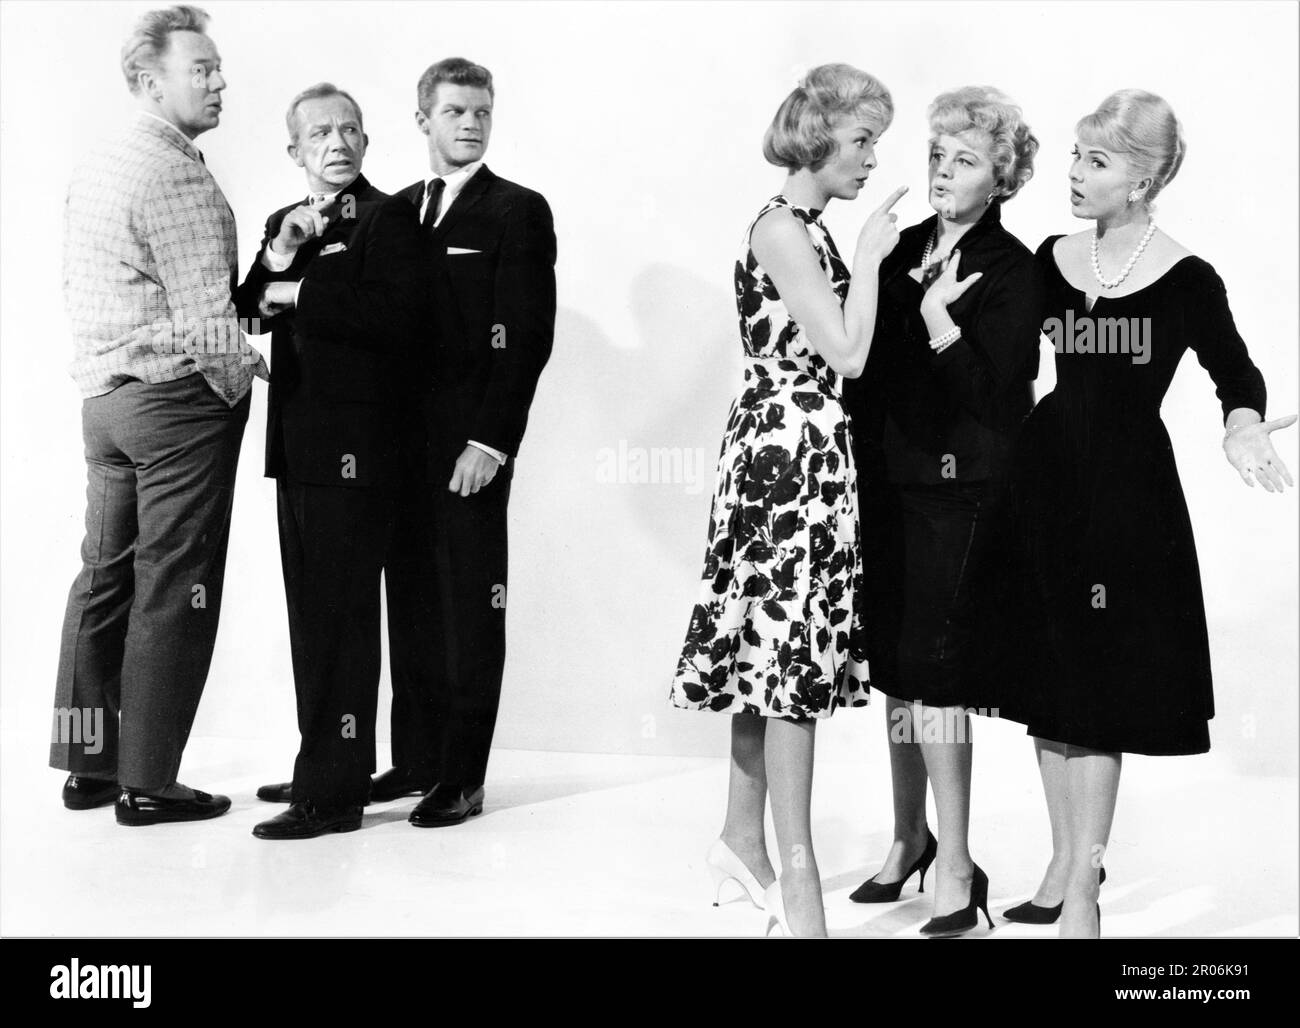 VAN JOHNSON RAY WALSTON JEREMY SLATE JANET LEIGH SHELLEY WINTERS and MARTHA HYER posed publicity portrait in WIVES AND LOVERS 1963 director JOHN RICH play Jay Presson Allen screenplay Edward Anhalt costume design Edith Head music Lyn Murray Hal Wallis Productions / Paramount Pictures Stock Photo